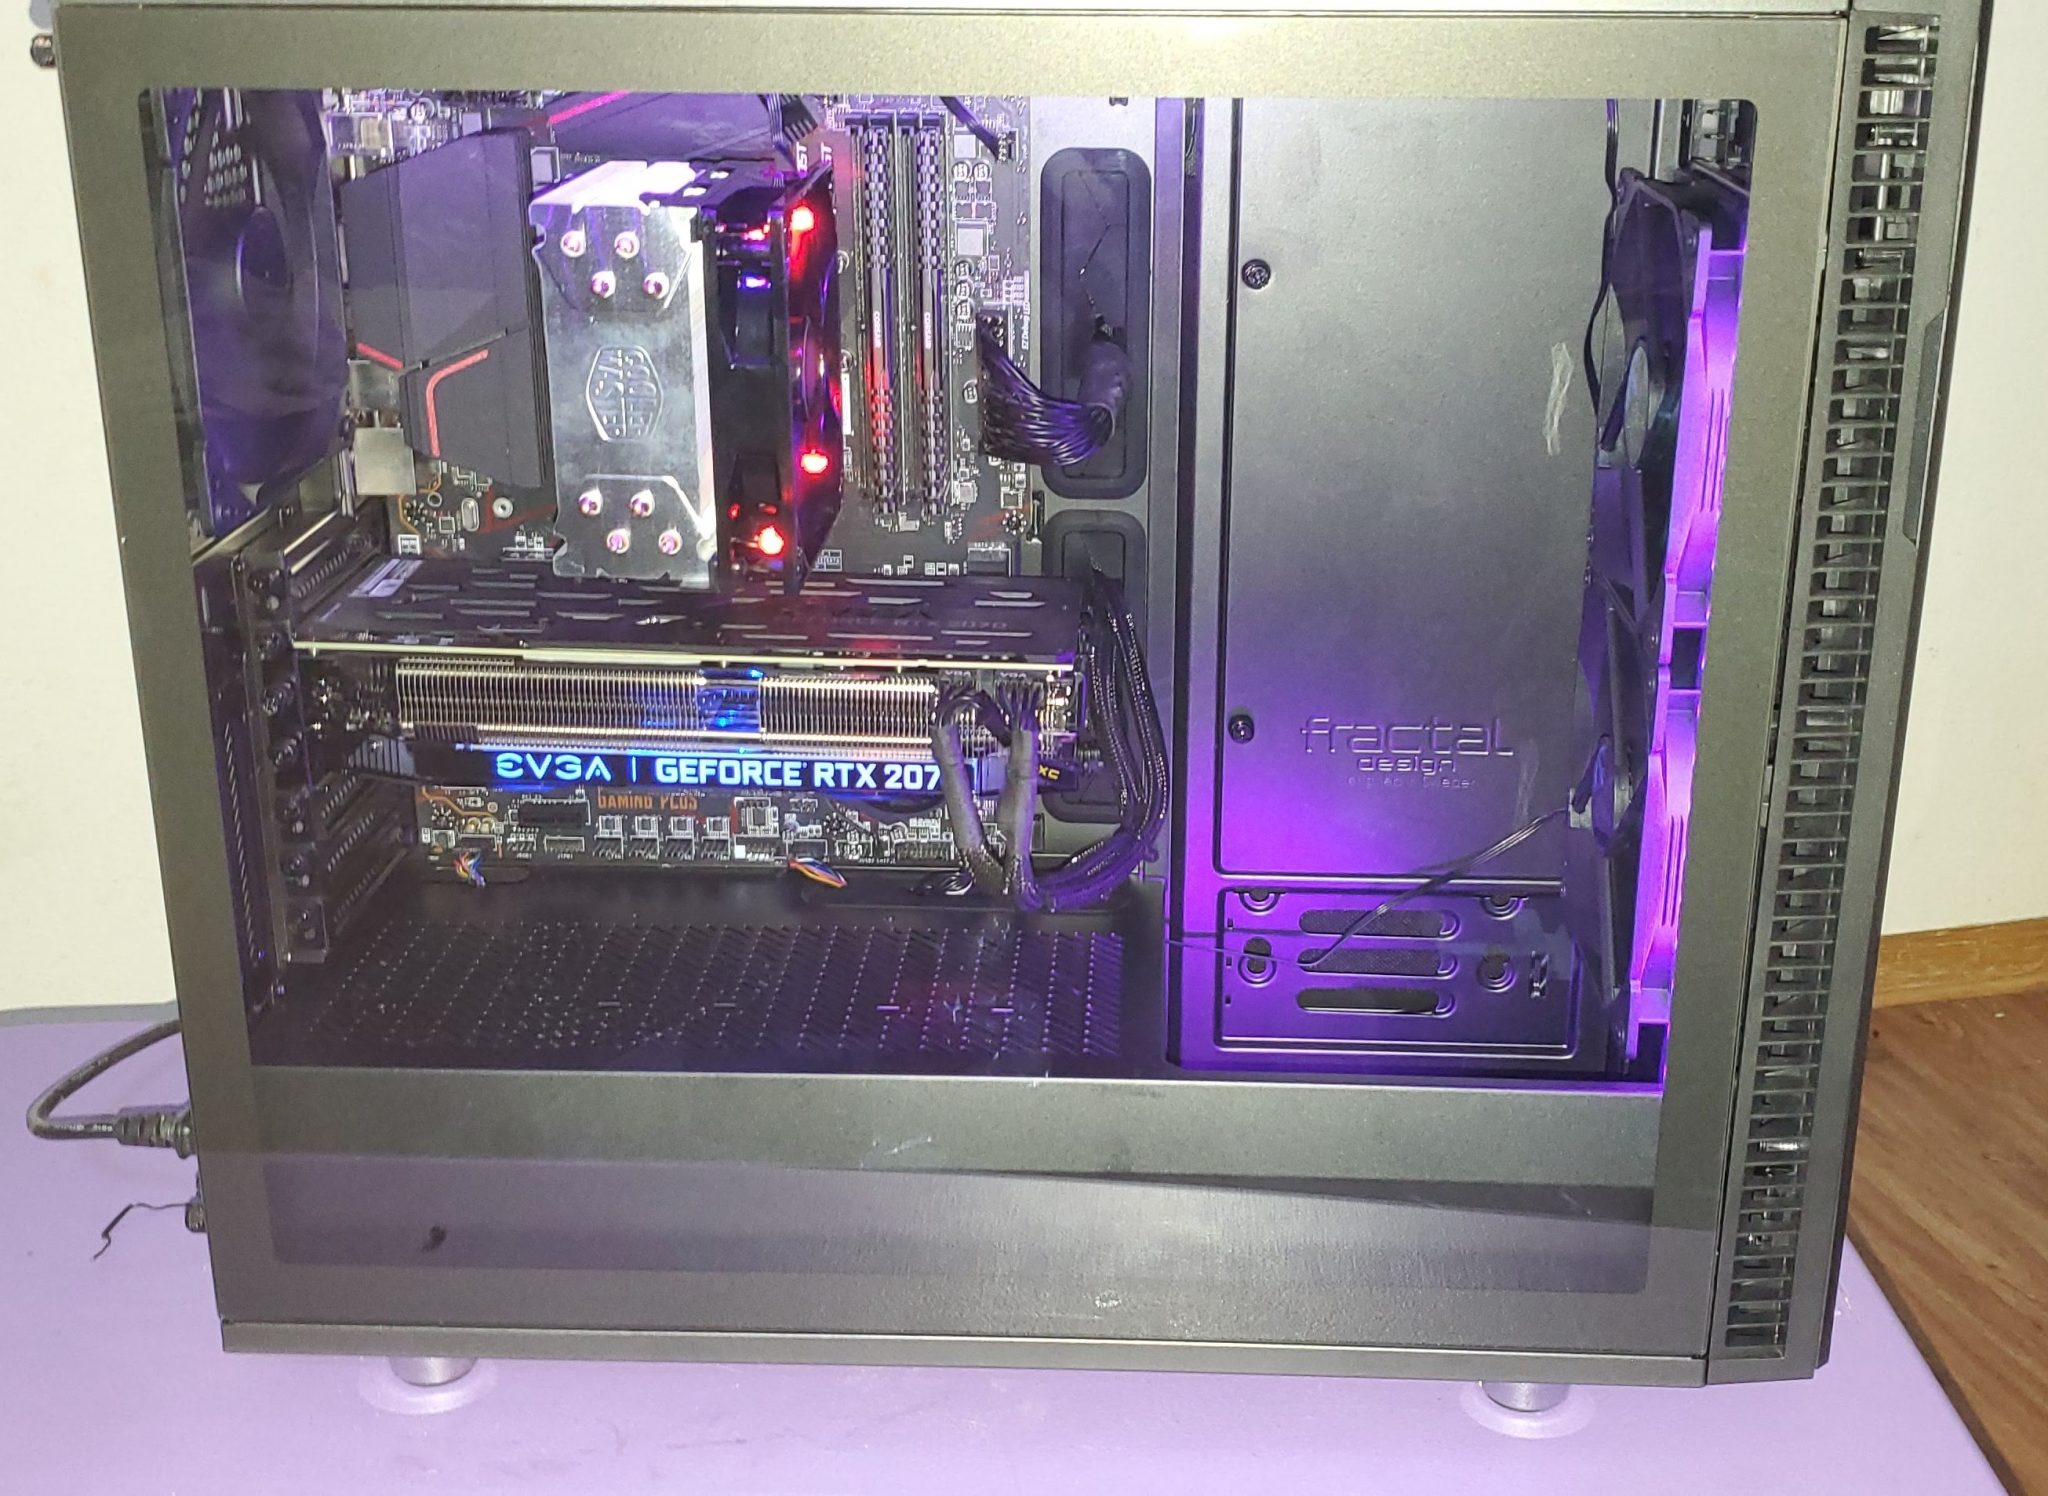 2019 Computer Build – Part 2 – High End Gaming PC Build / Results